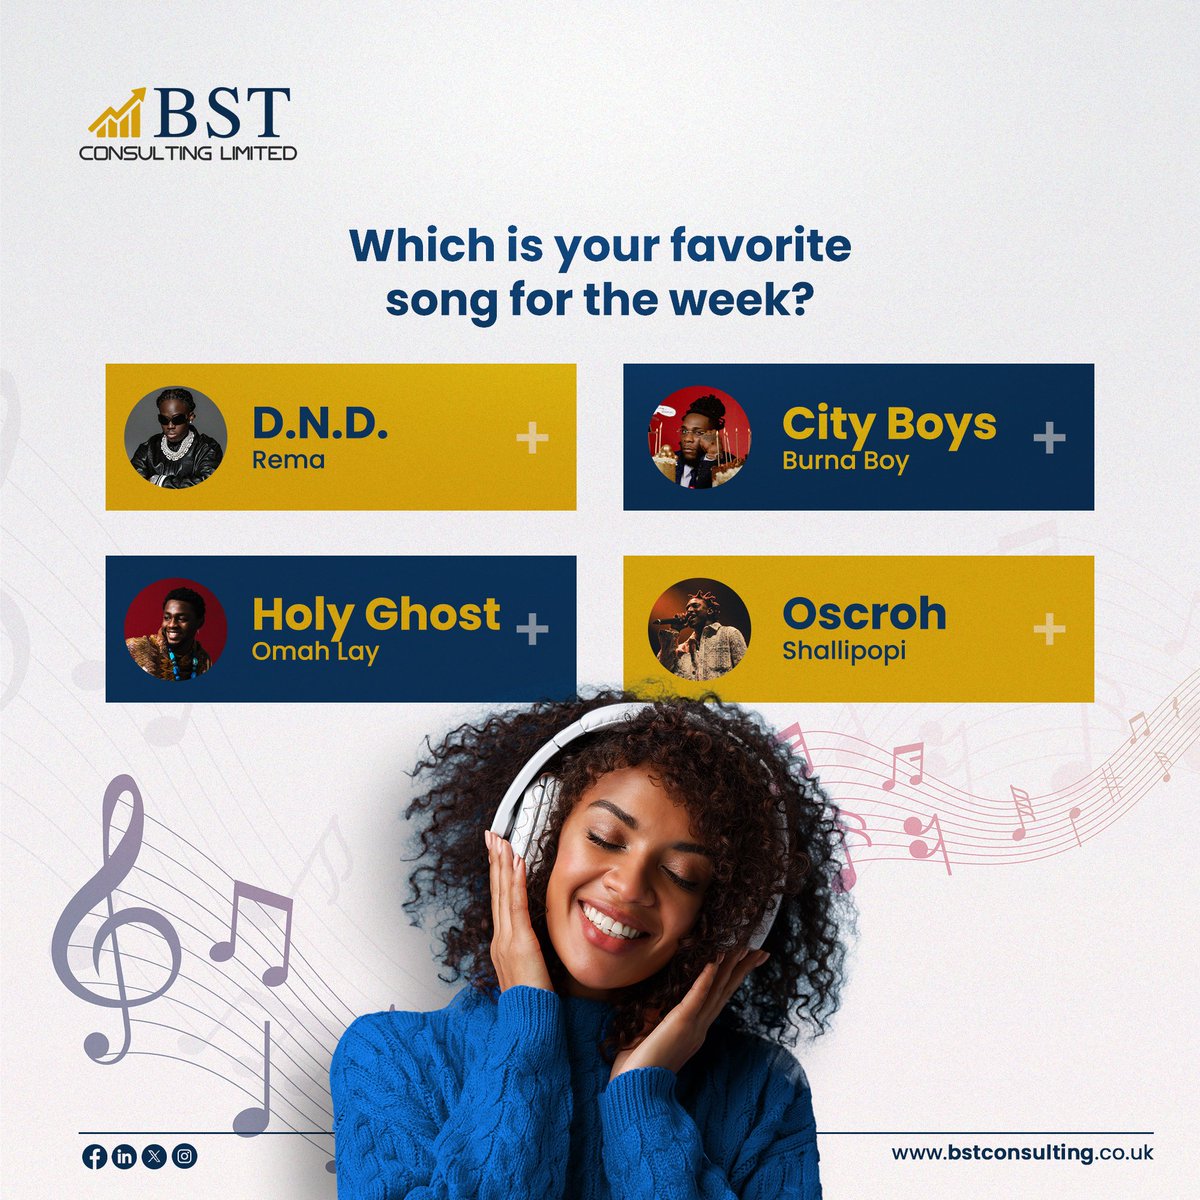 Let's hear from you in the comment section!

#MusicThursday #Vibes #Afrobeats #NewMusic #BSTConsulting